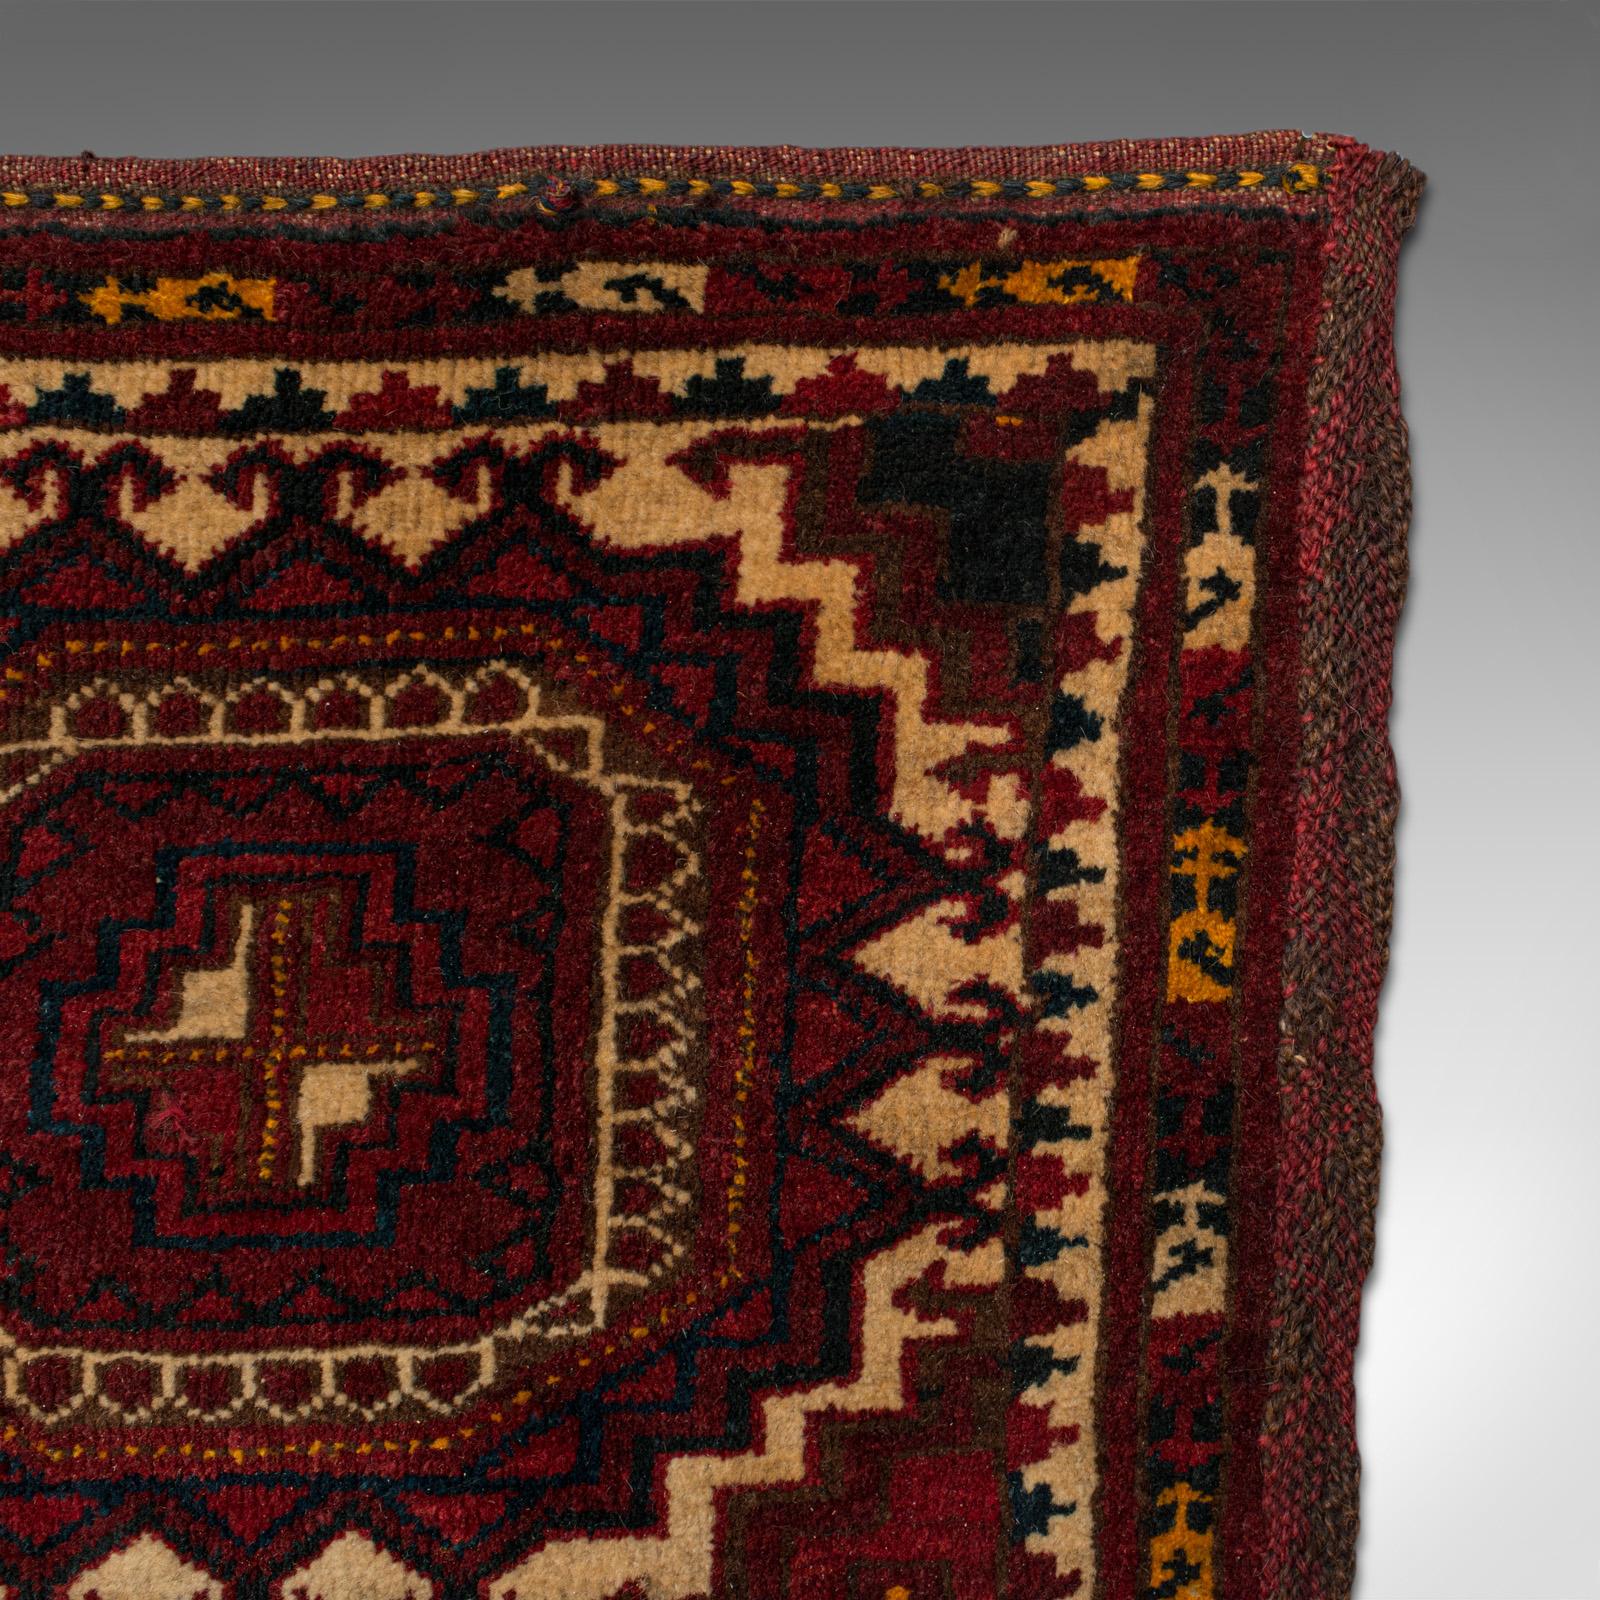 Antique Tekke Torba, Caucasian, Woven, Tent Bag, Decorative Wall Covering, 1900 For Sale 1